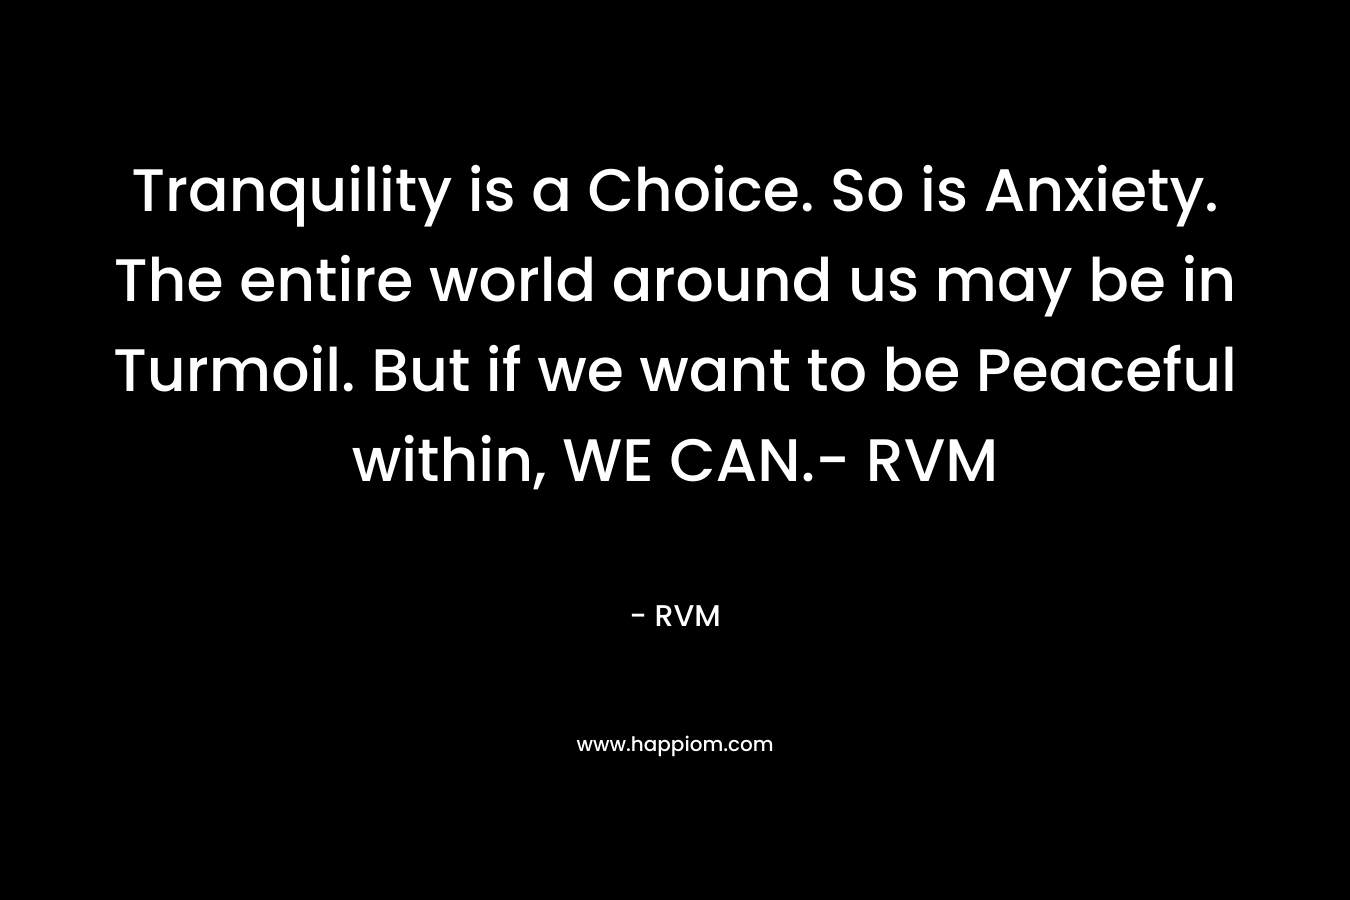 Tranquility is a Choice. So is Anxiety. The entire world around us may be in Turmoil. But if we want to be Peaceful within, WE CAN.- RVM